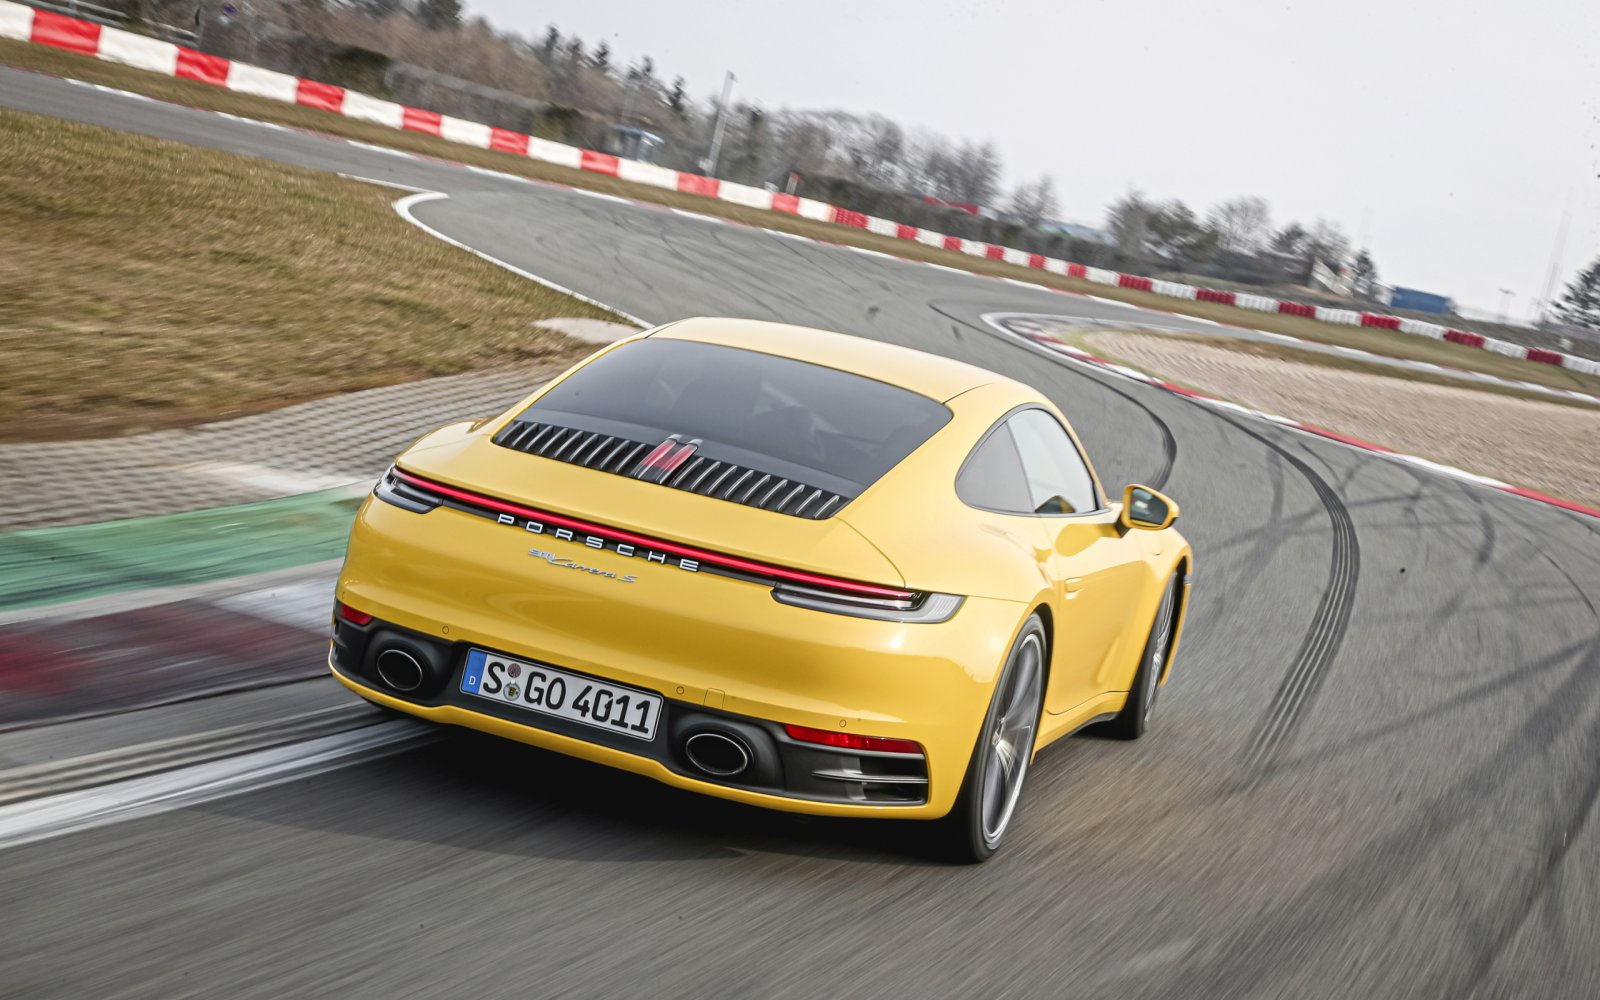 Test: This is how the BMW M4 tries to knock the Porsche 911 off the throne